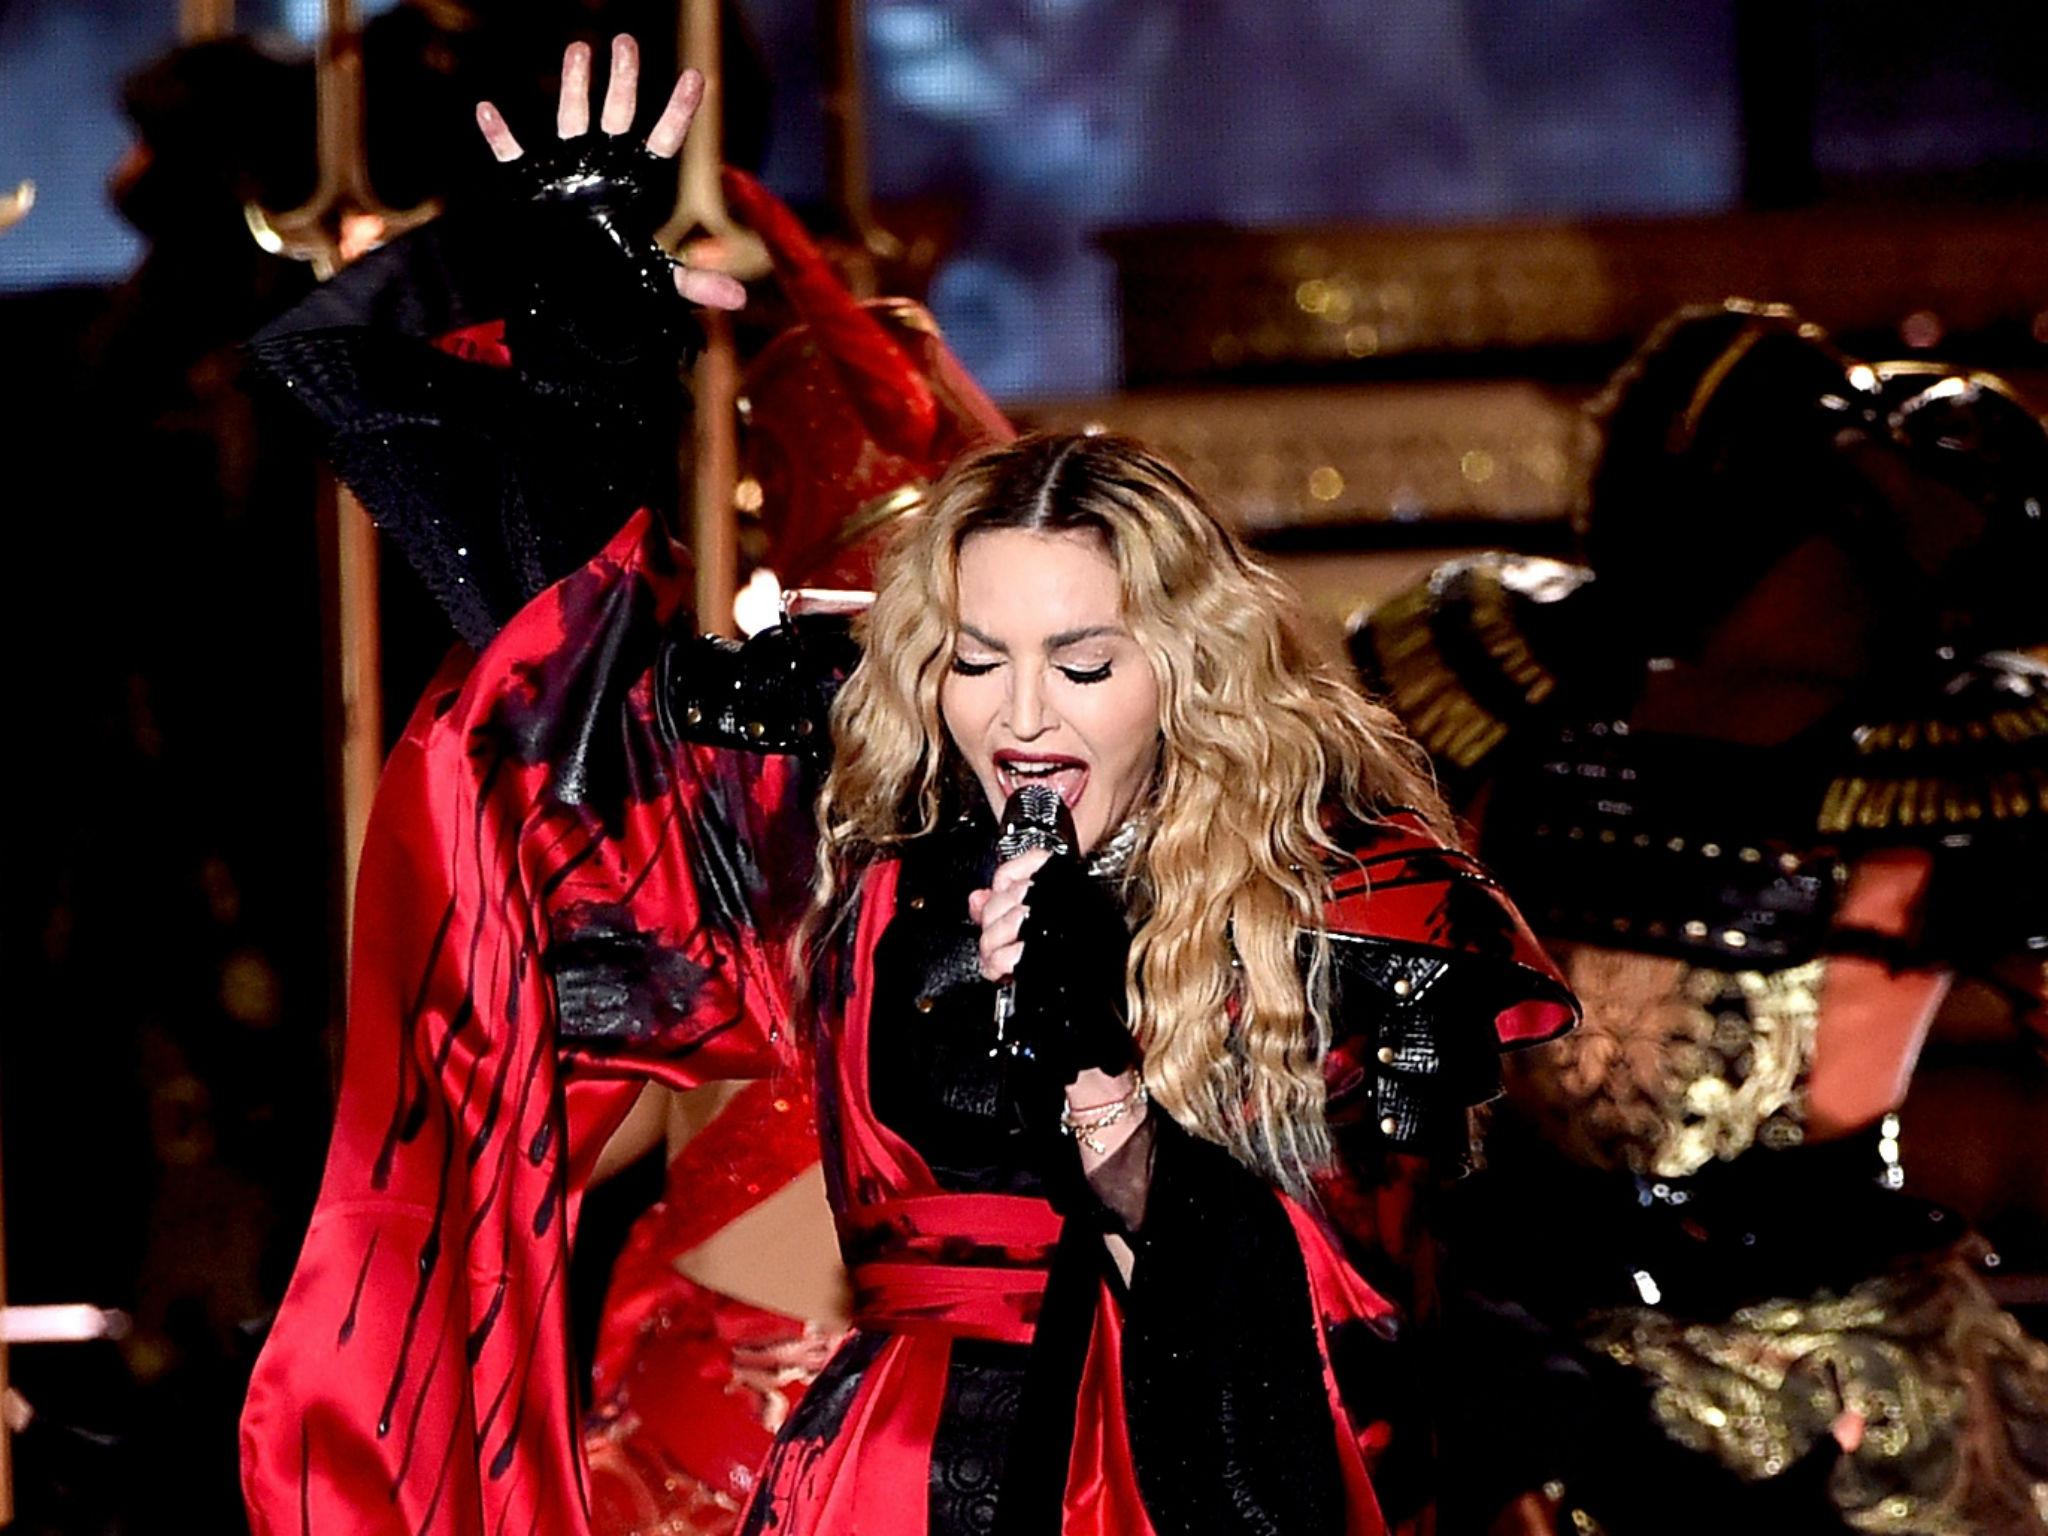 Singer Madonna performs during her 'Rebel Heart' tour at the Forum on October 27, 2015 in Inglewood, California